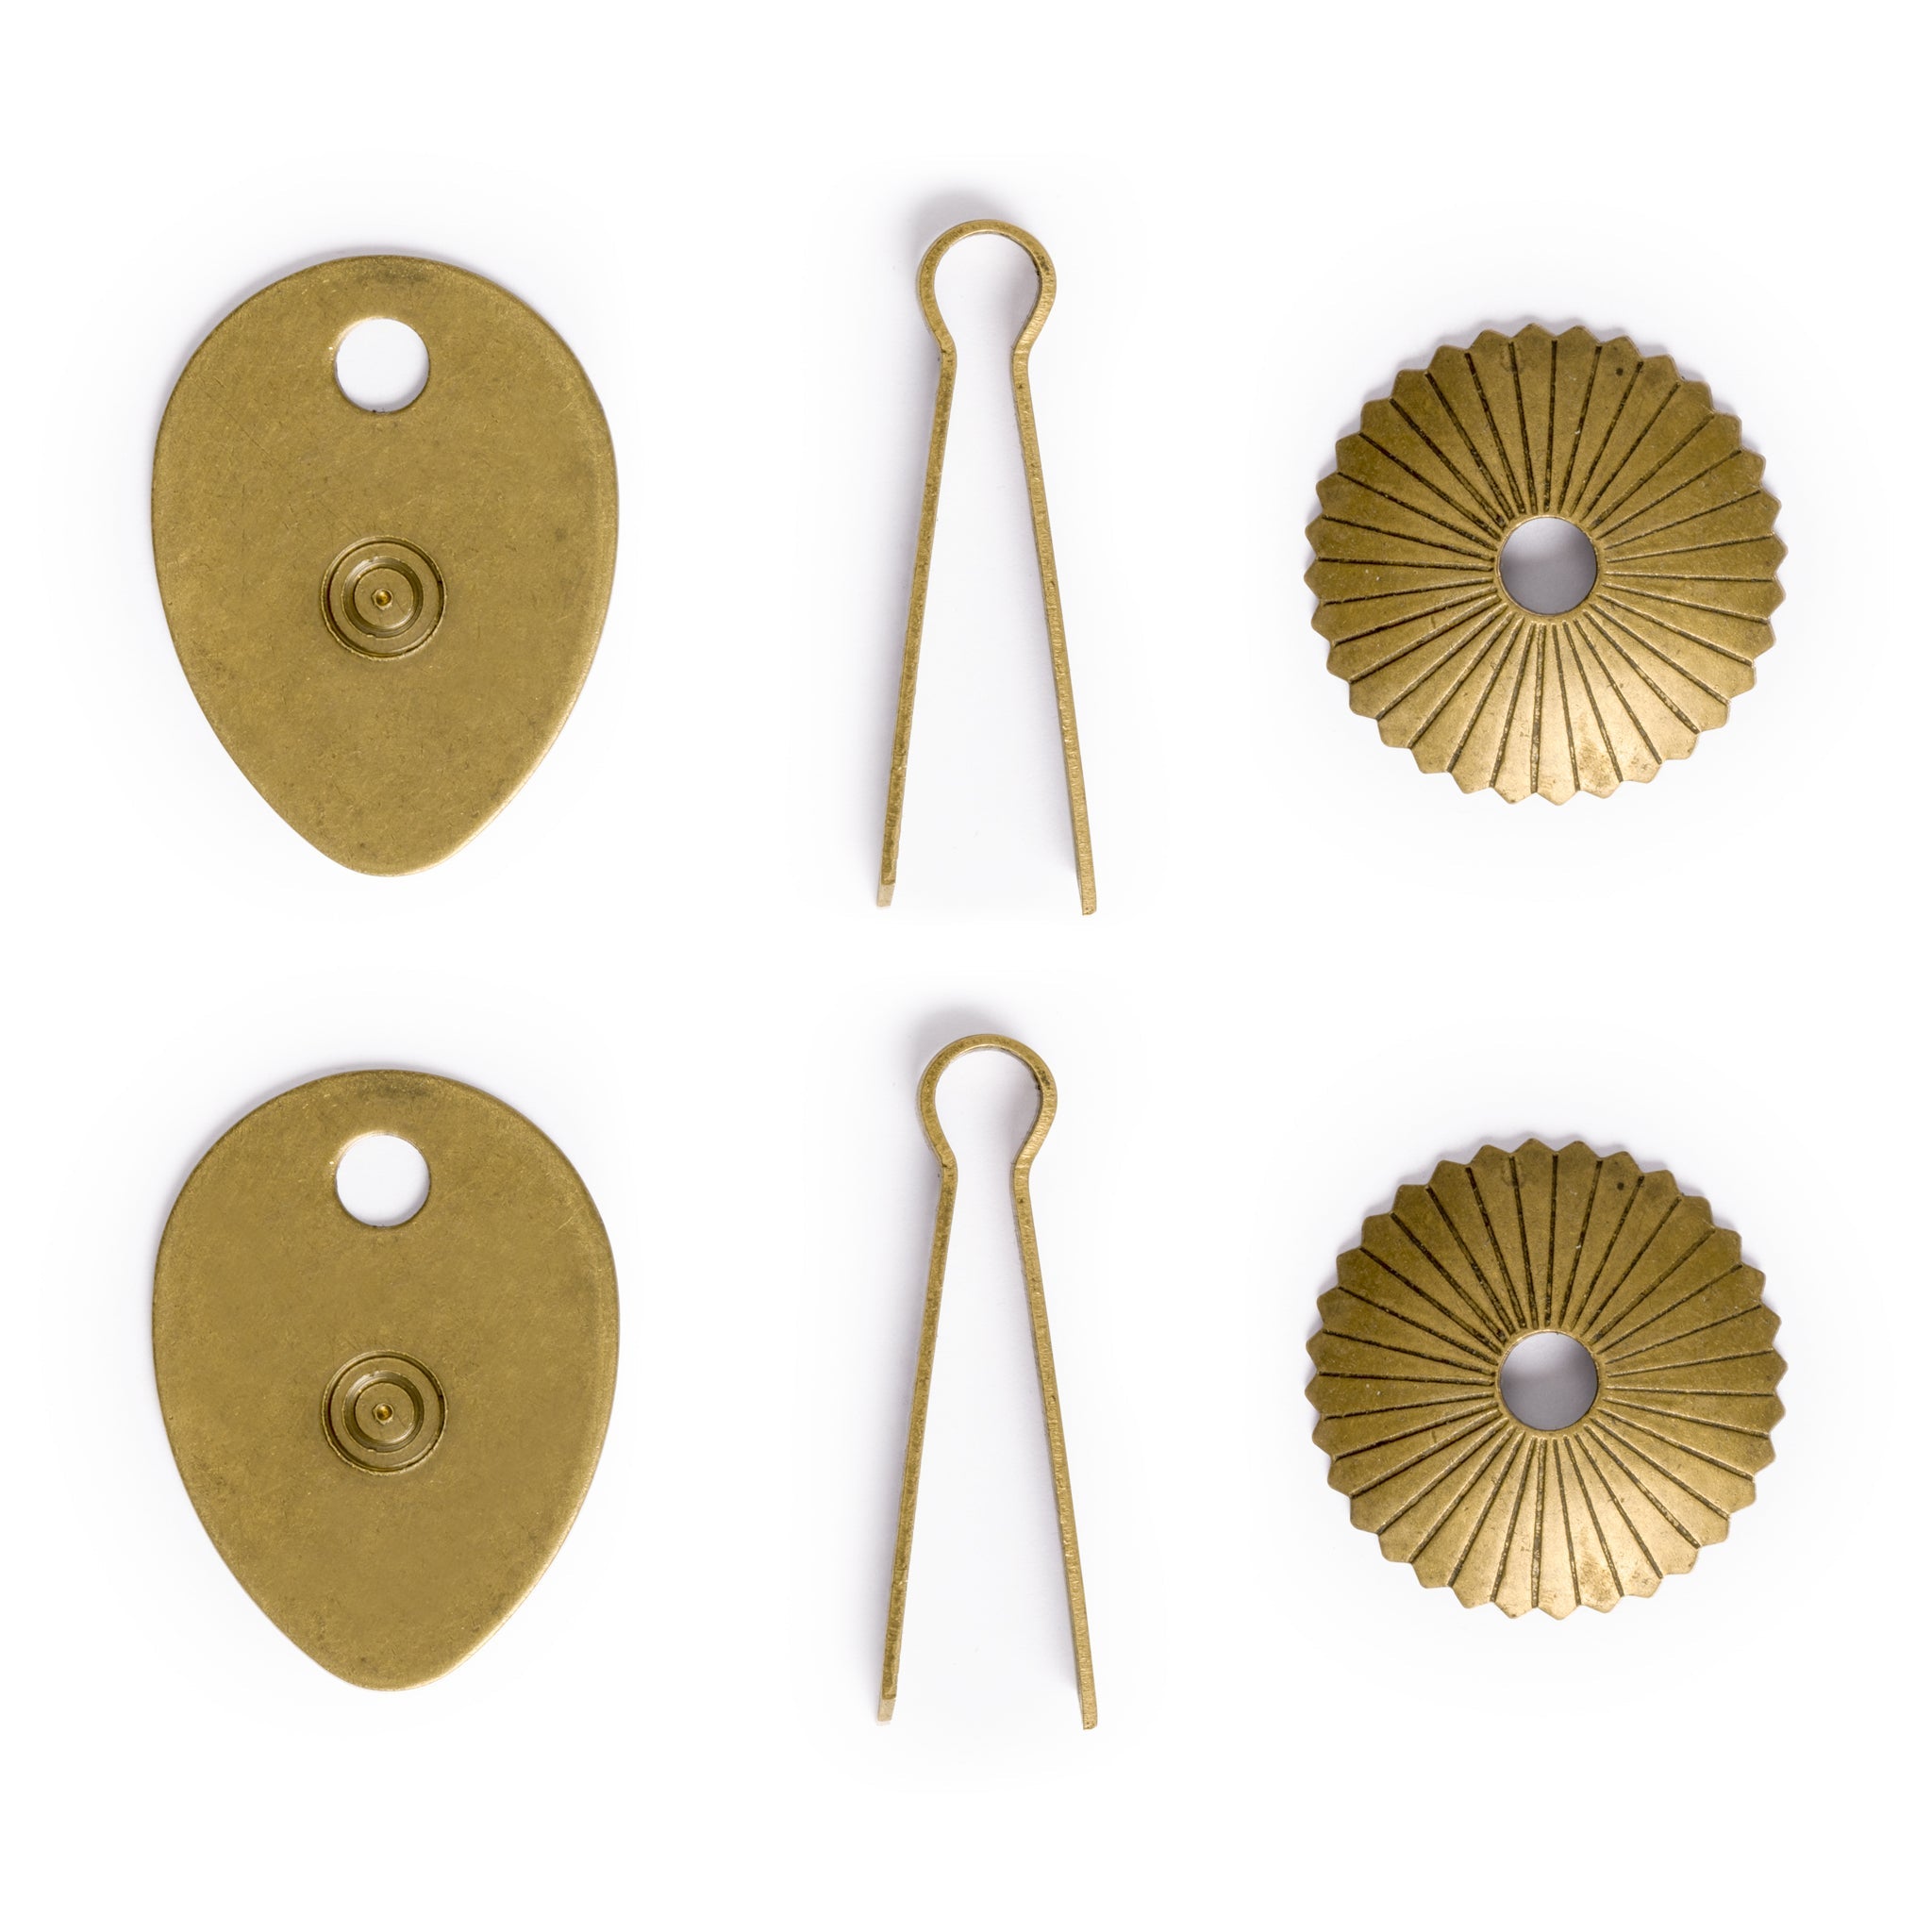 Melon Seed Pulls 1.6" - Set of 2-Chinese Brass Hardware